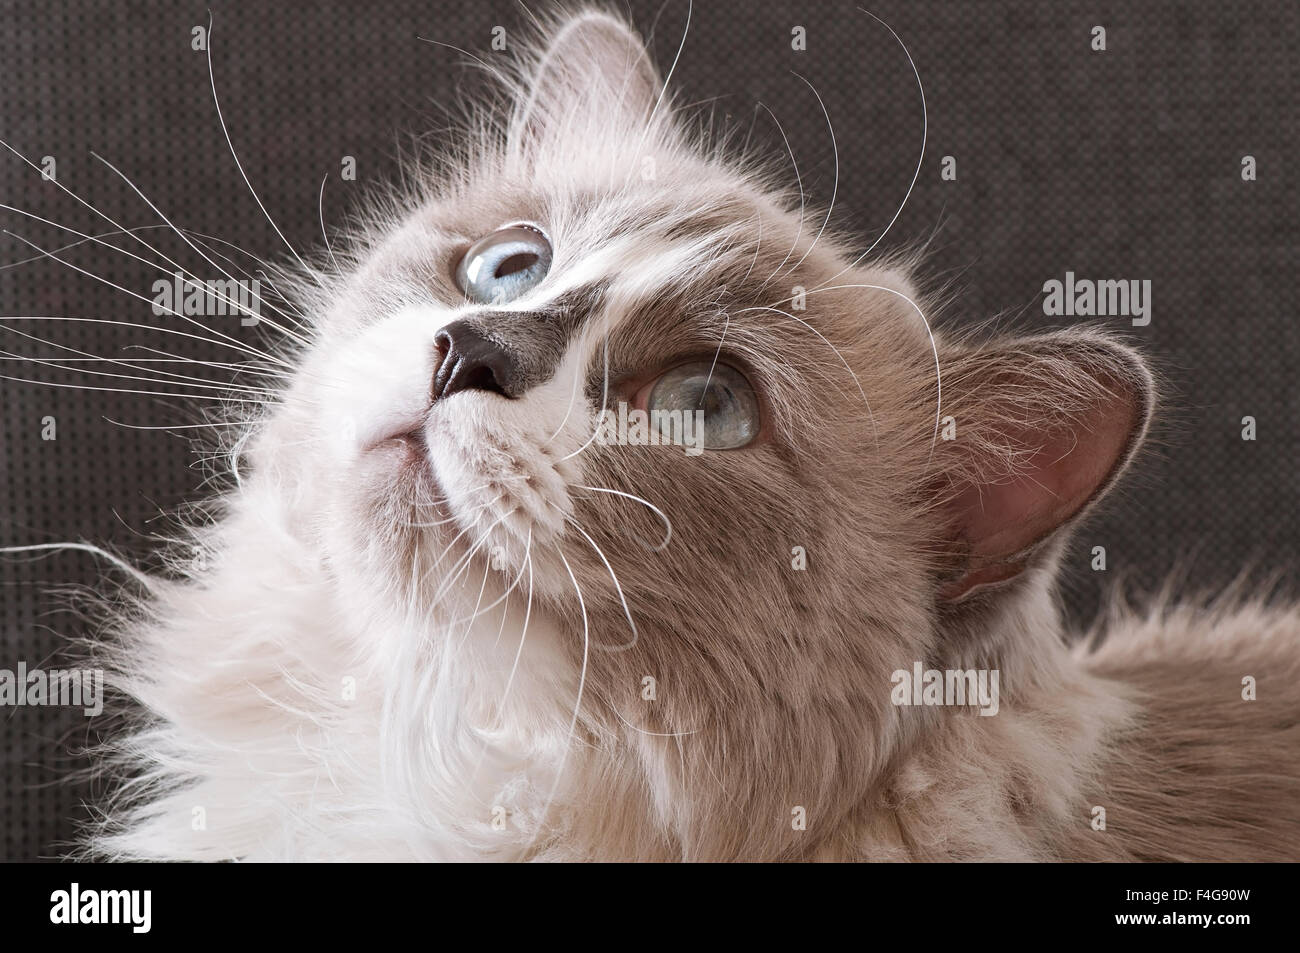 Ragdoll breed of cat face close-up Stock Photo